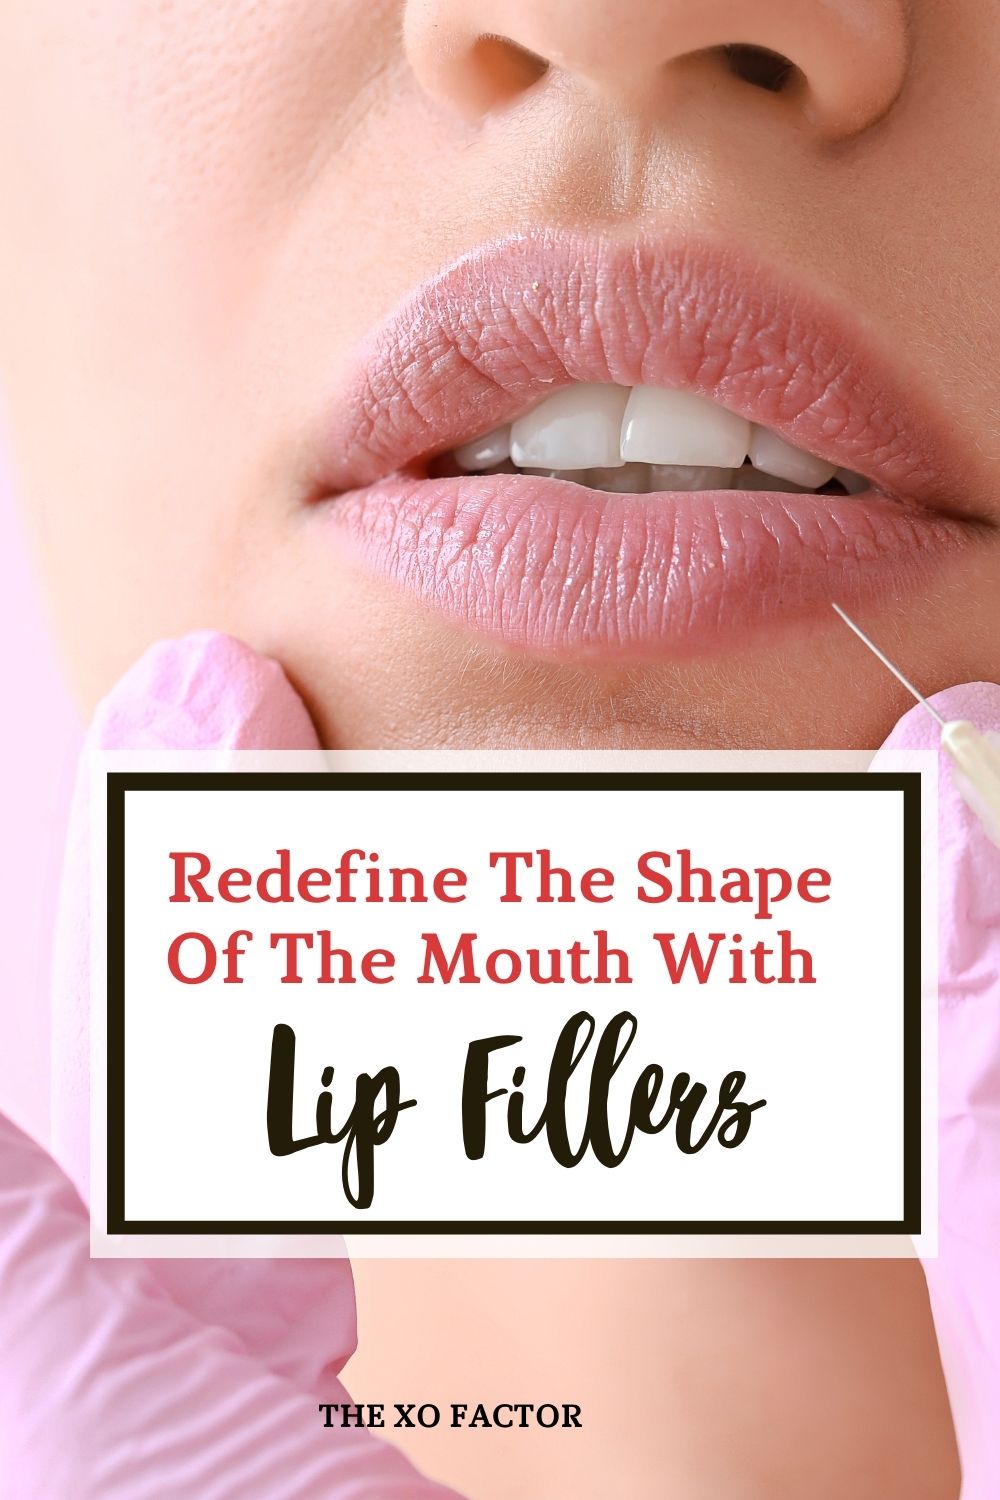 Redefine The Shape Of The Mouth With Lip Fillers